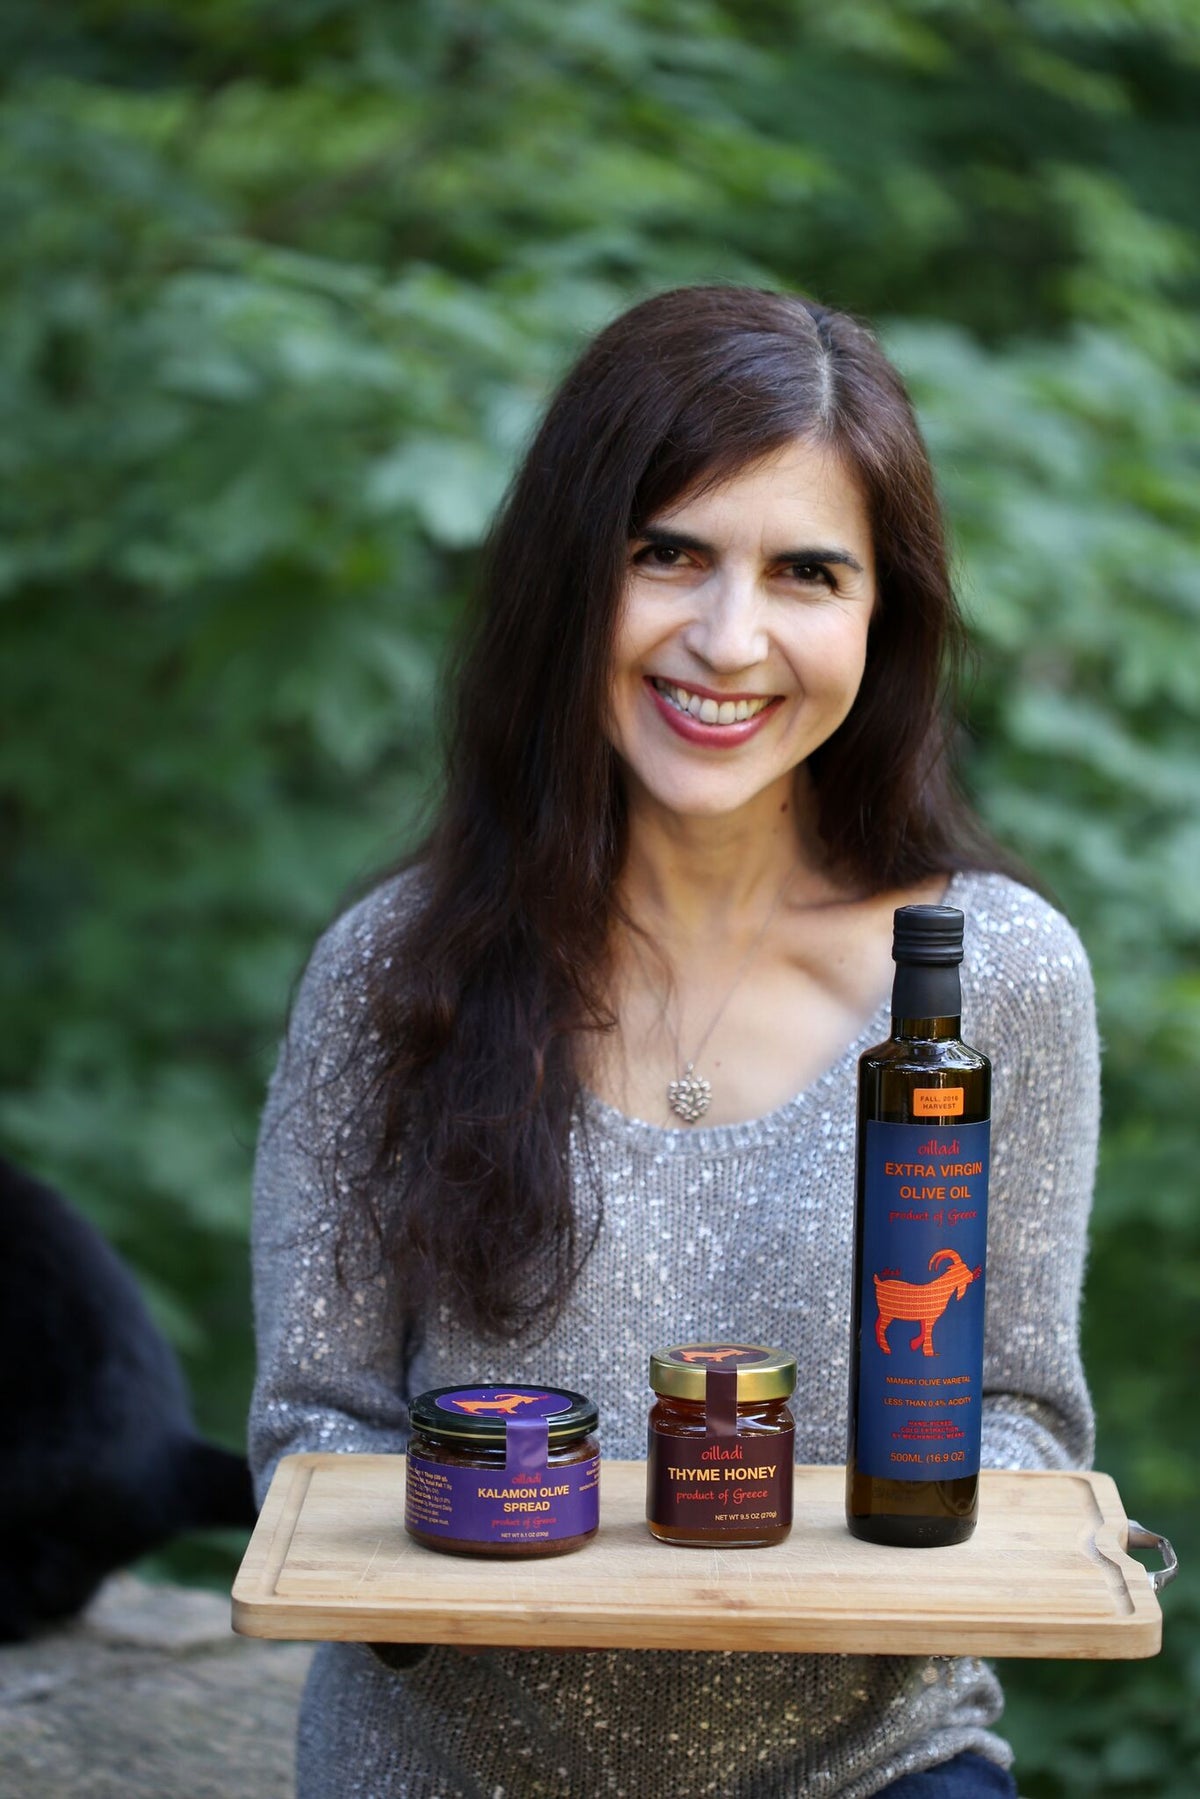 Woman holding tray of Oilladi products including olive spread, thyme honey and extra virgin olive oil